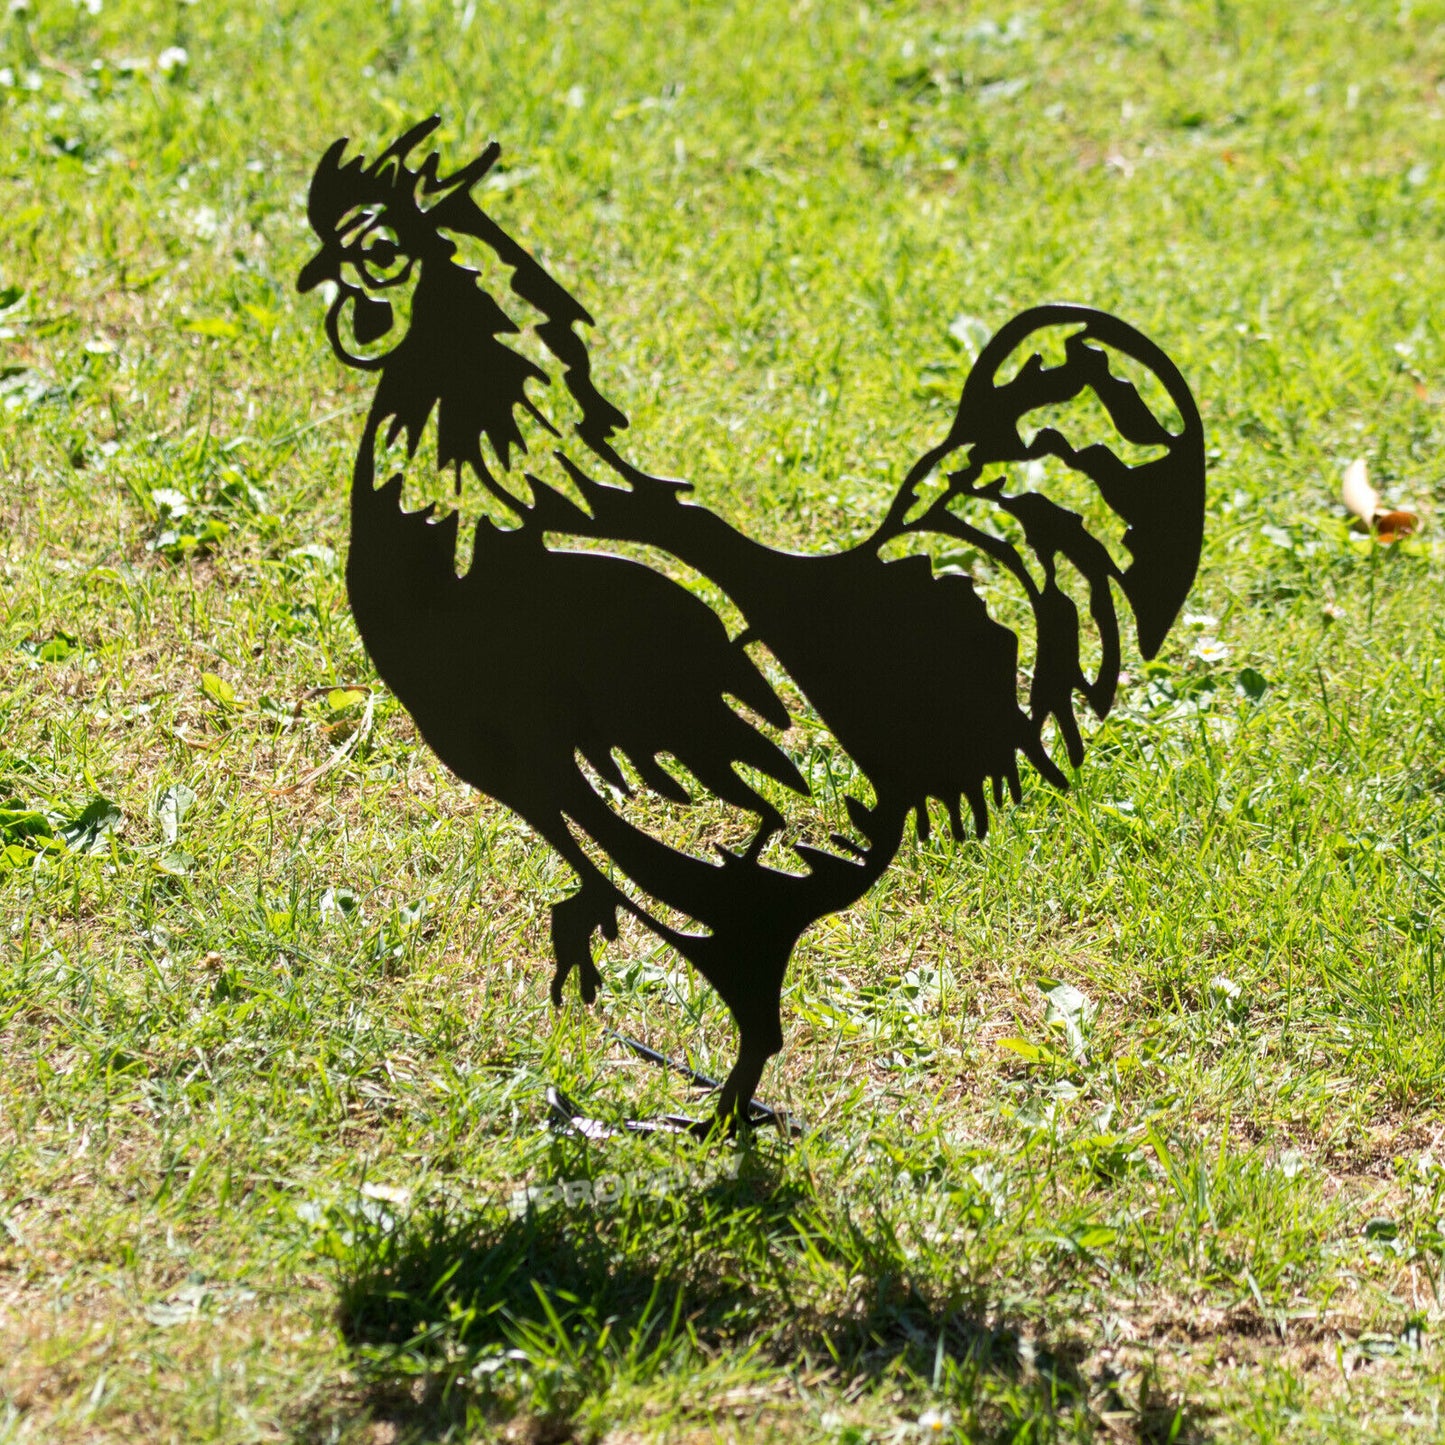 Black Garden Rooster Silhouette Stake Ornament